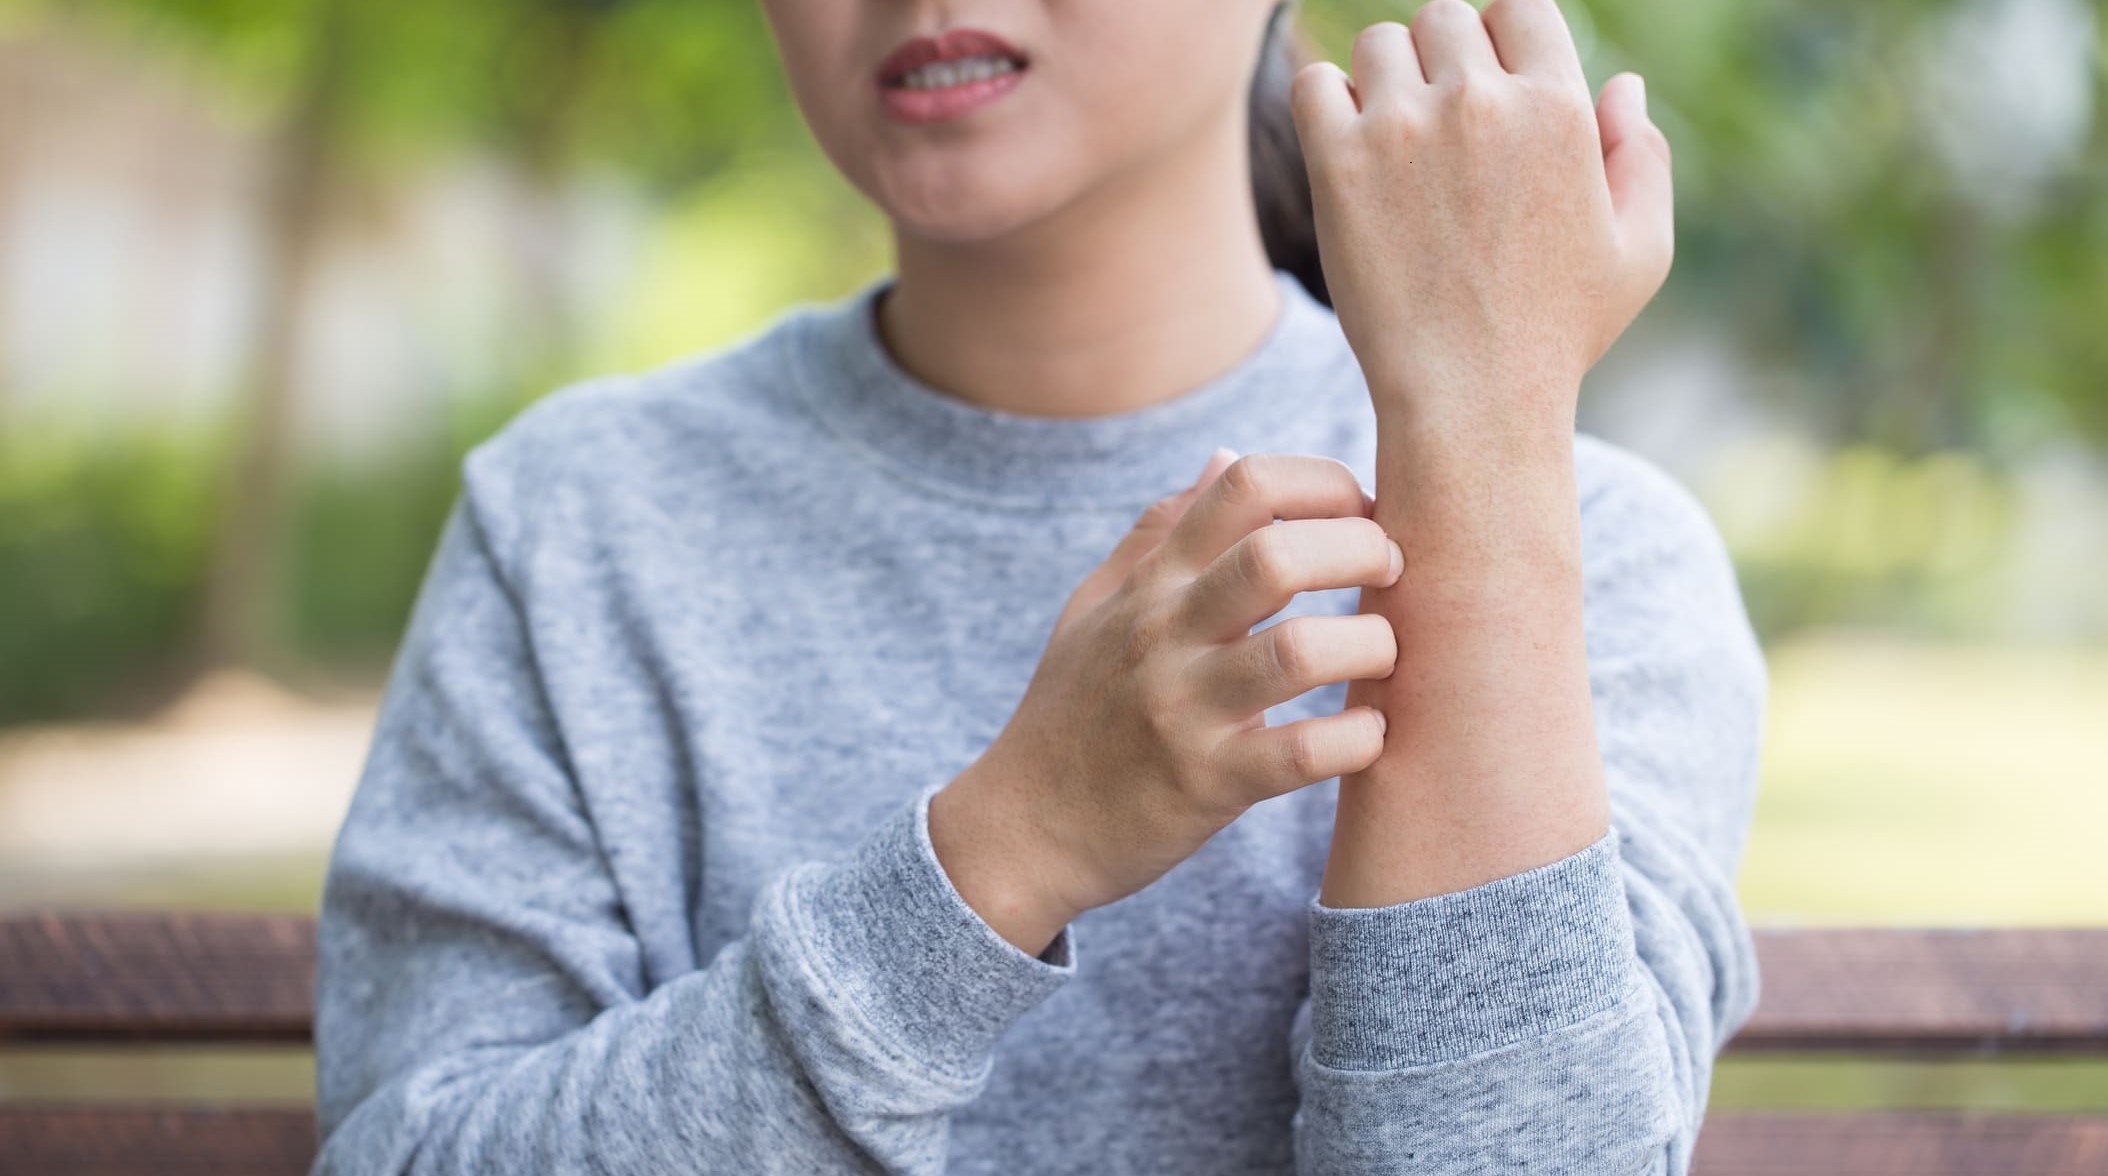 Can Eczema Go Away On Its Own?